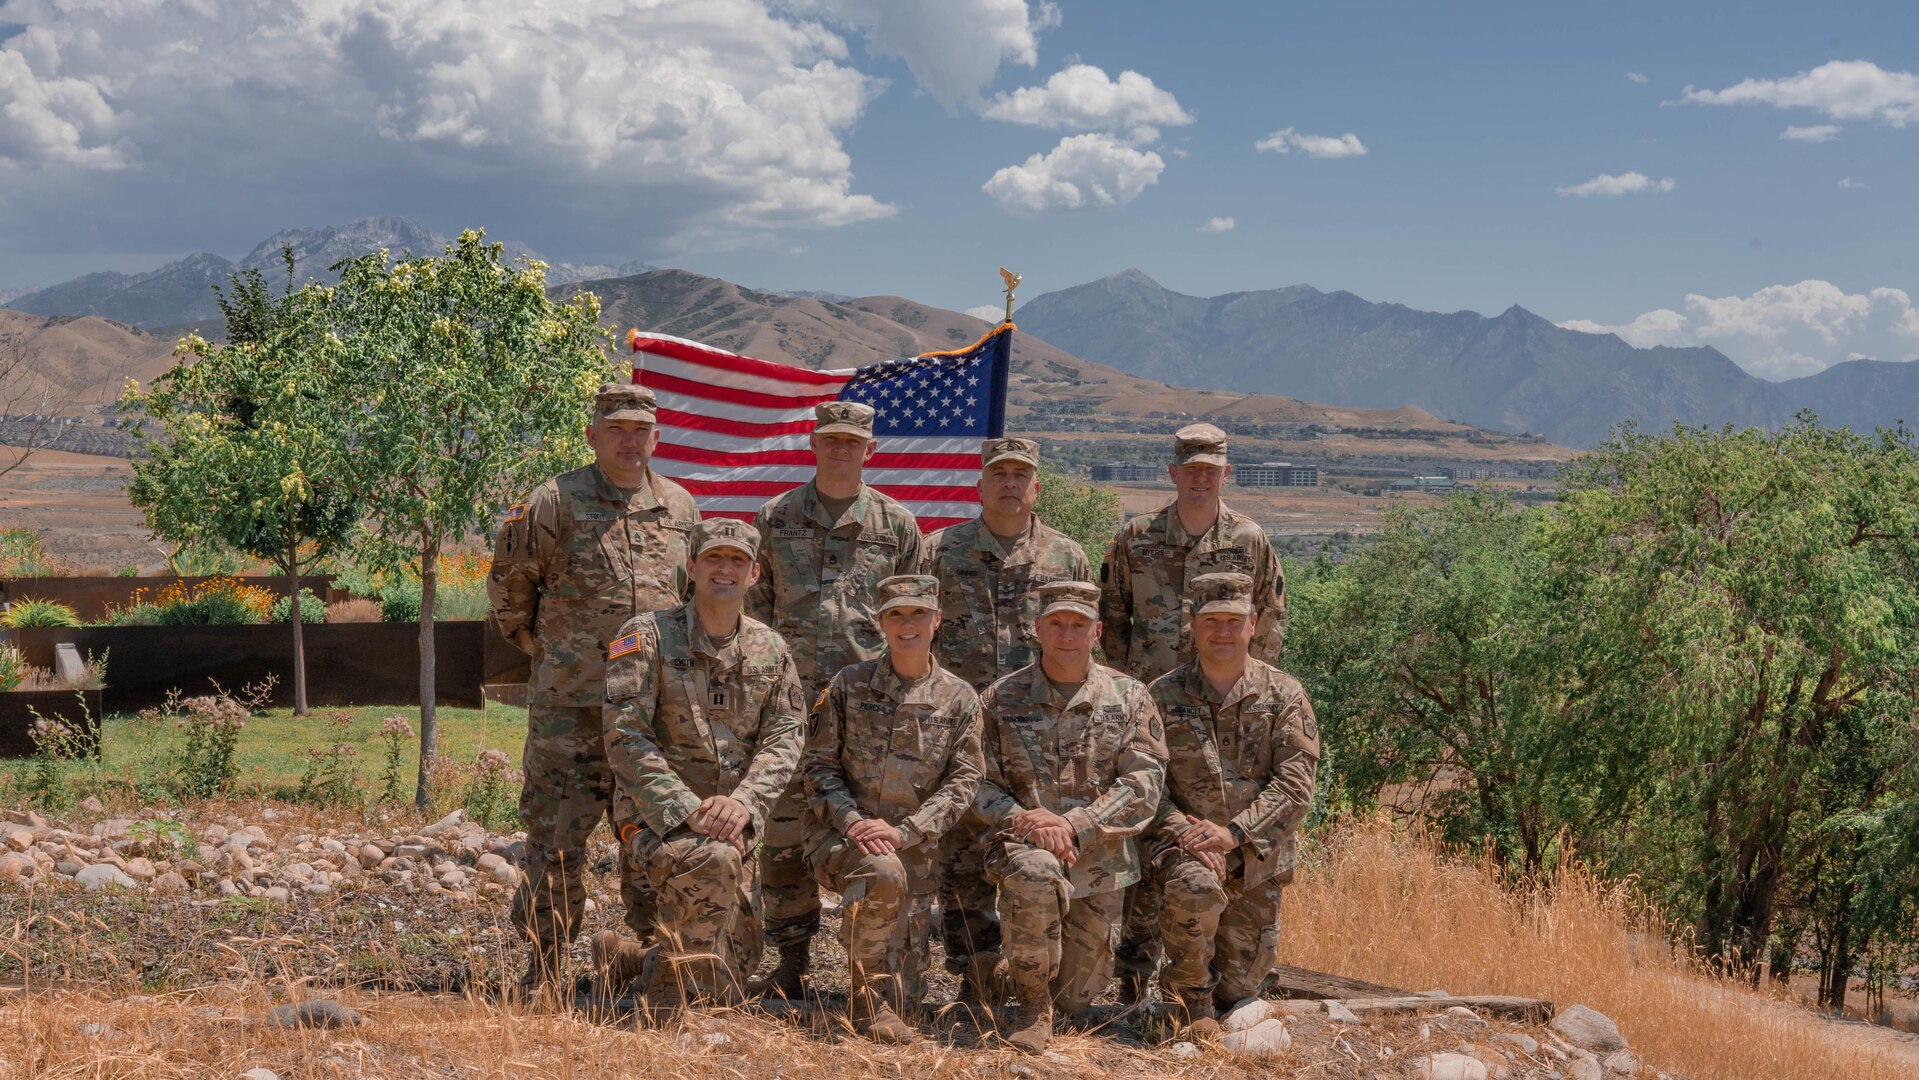 Eight cyber experts from the Pennsylvania National Guard are participating in Cyber Shield, the Department of Defense’s largest unclassified cyber defense exercise, July 10-23 at Camp Williams, Utah. Bottom row, left to right: Capt. Sean Smith, Maj. Christine Pierce, Chief Warrant Officer 3 Jeremy Marroncelli, Staff Sgt. Andrew Clancey; Top row, left to right: Sgt. 1st Class Keith Stout, Sgt. 1st Class Brian Frantz, Master Sgt. Elefterios Ginnis, Sgt. 1st Class Douglas Byers.